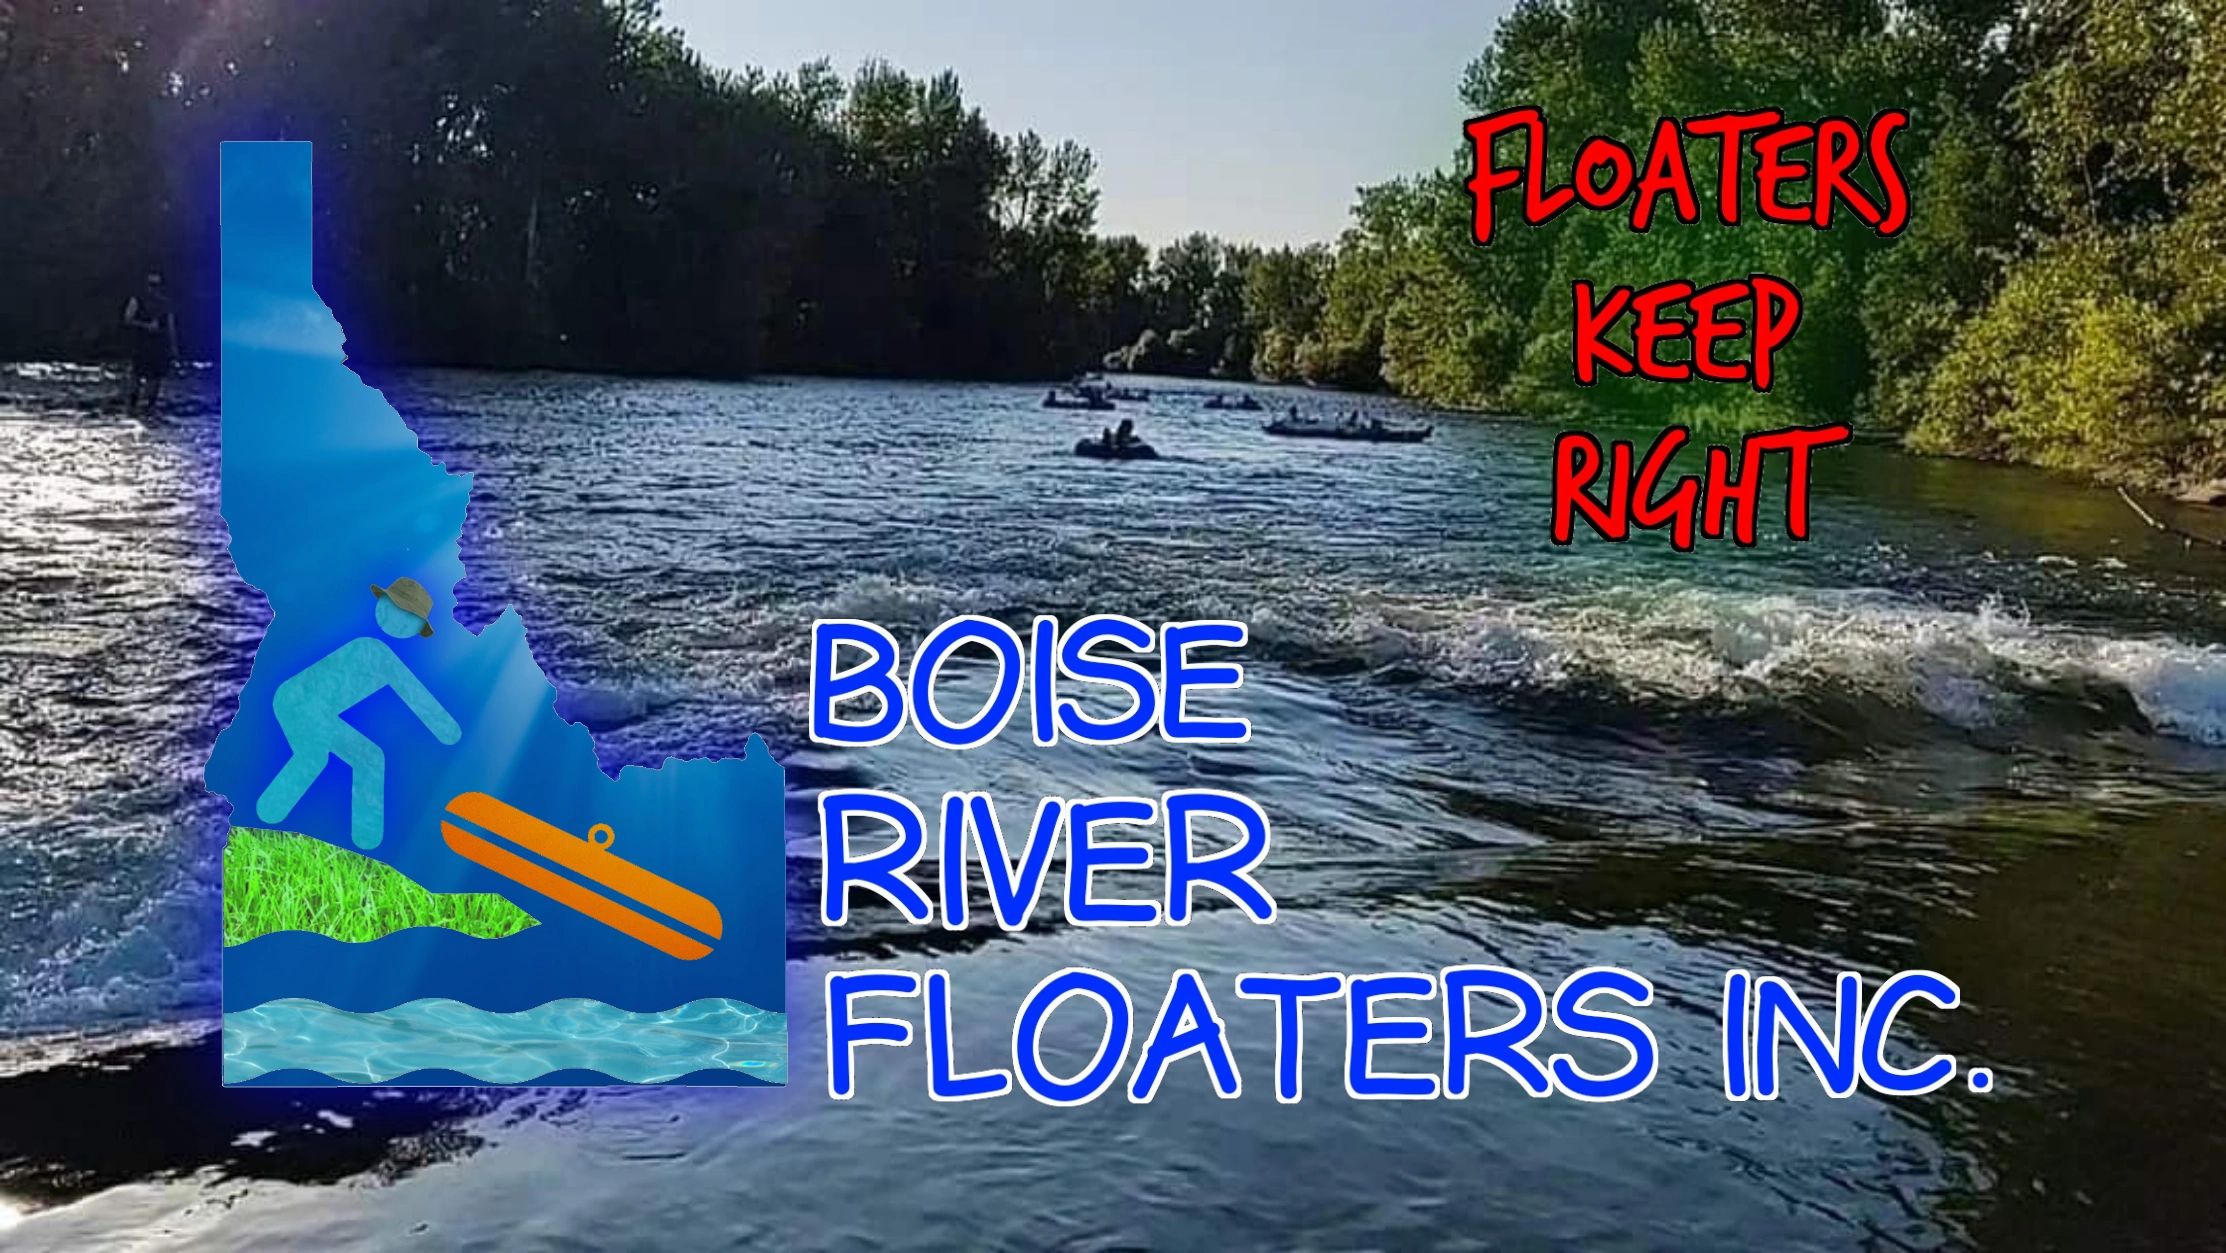 Boise River Floaters Inc.  (Floaters Keep Right)